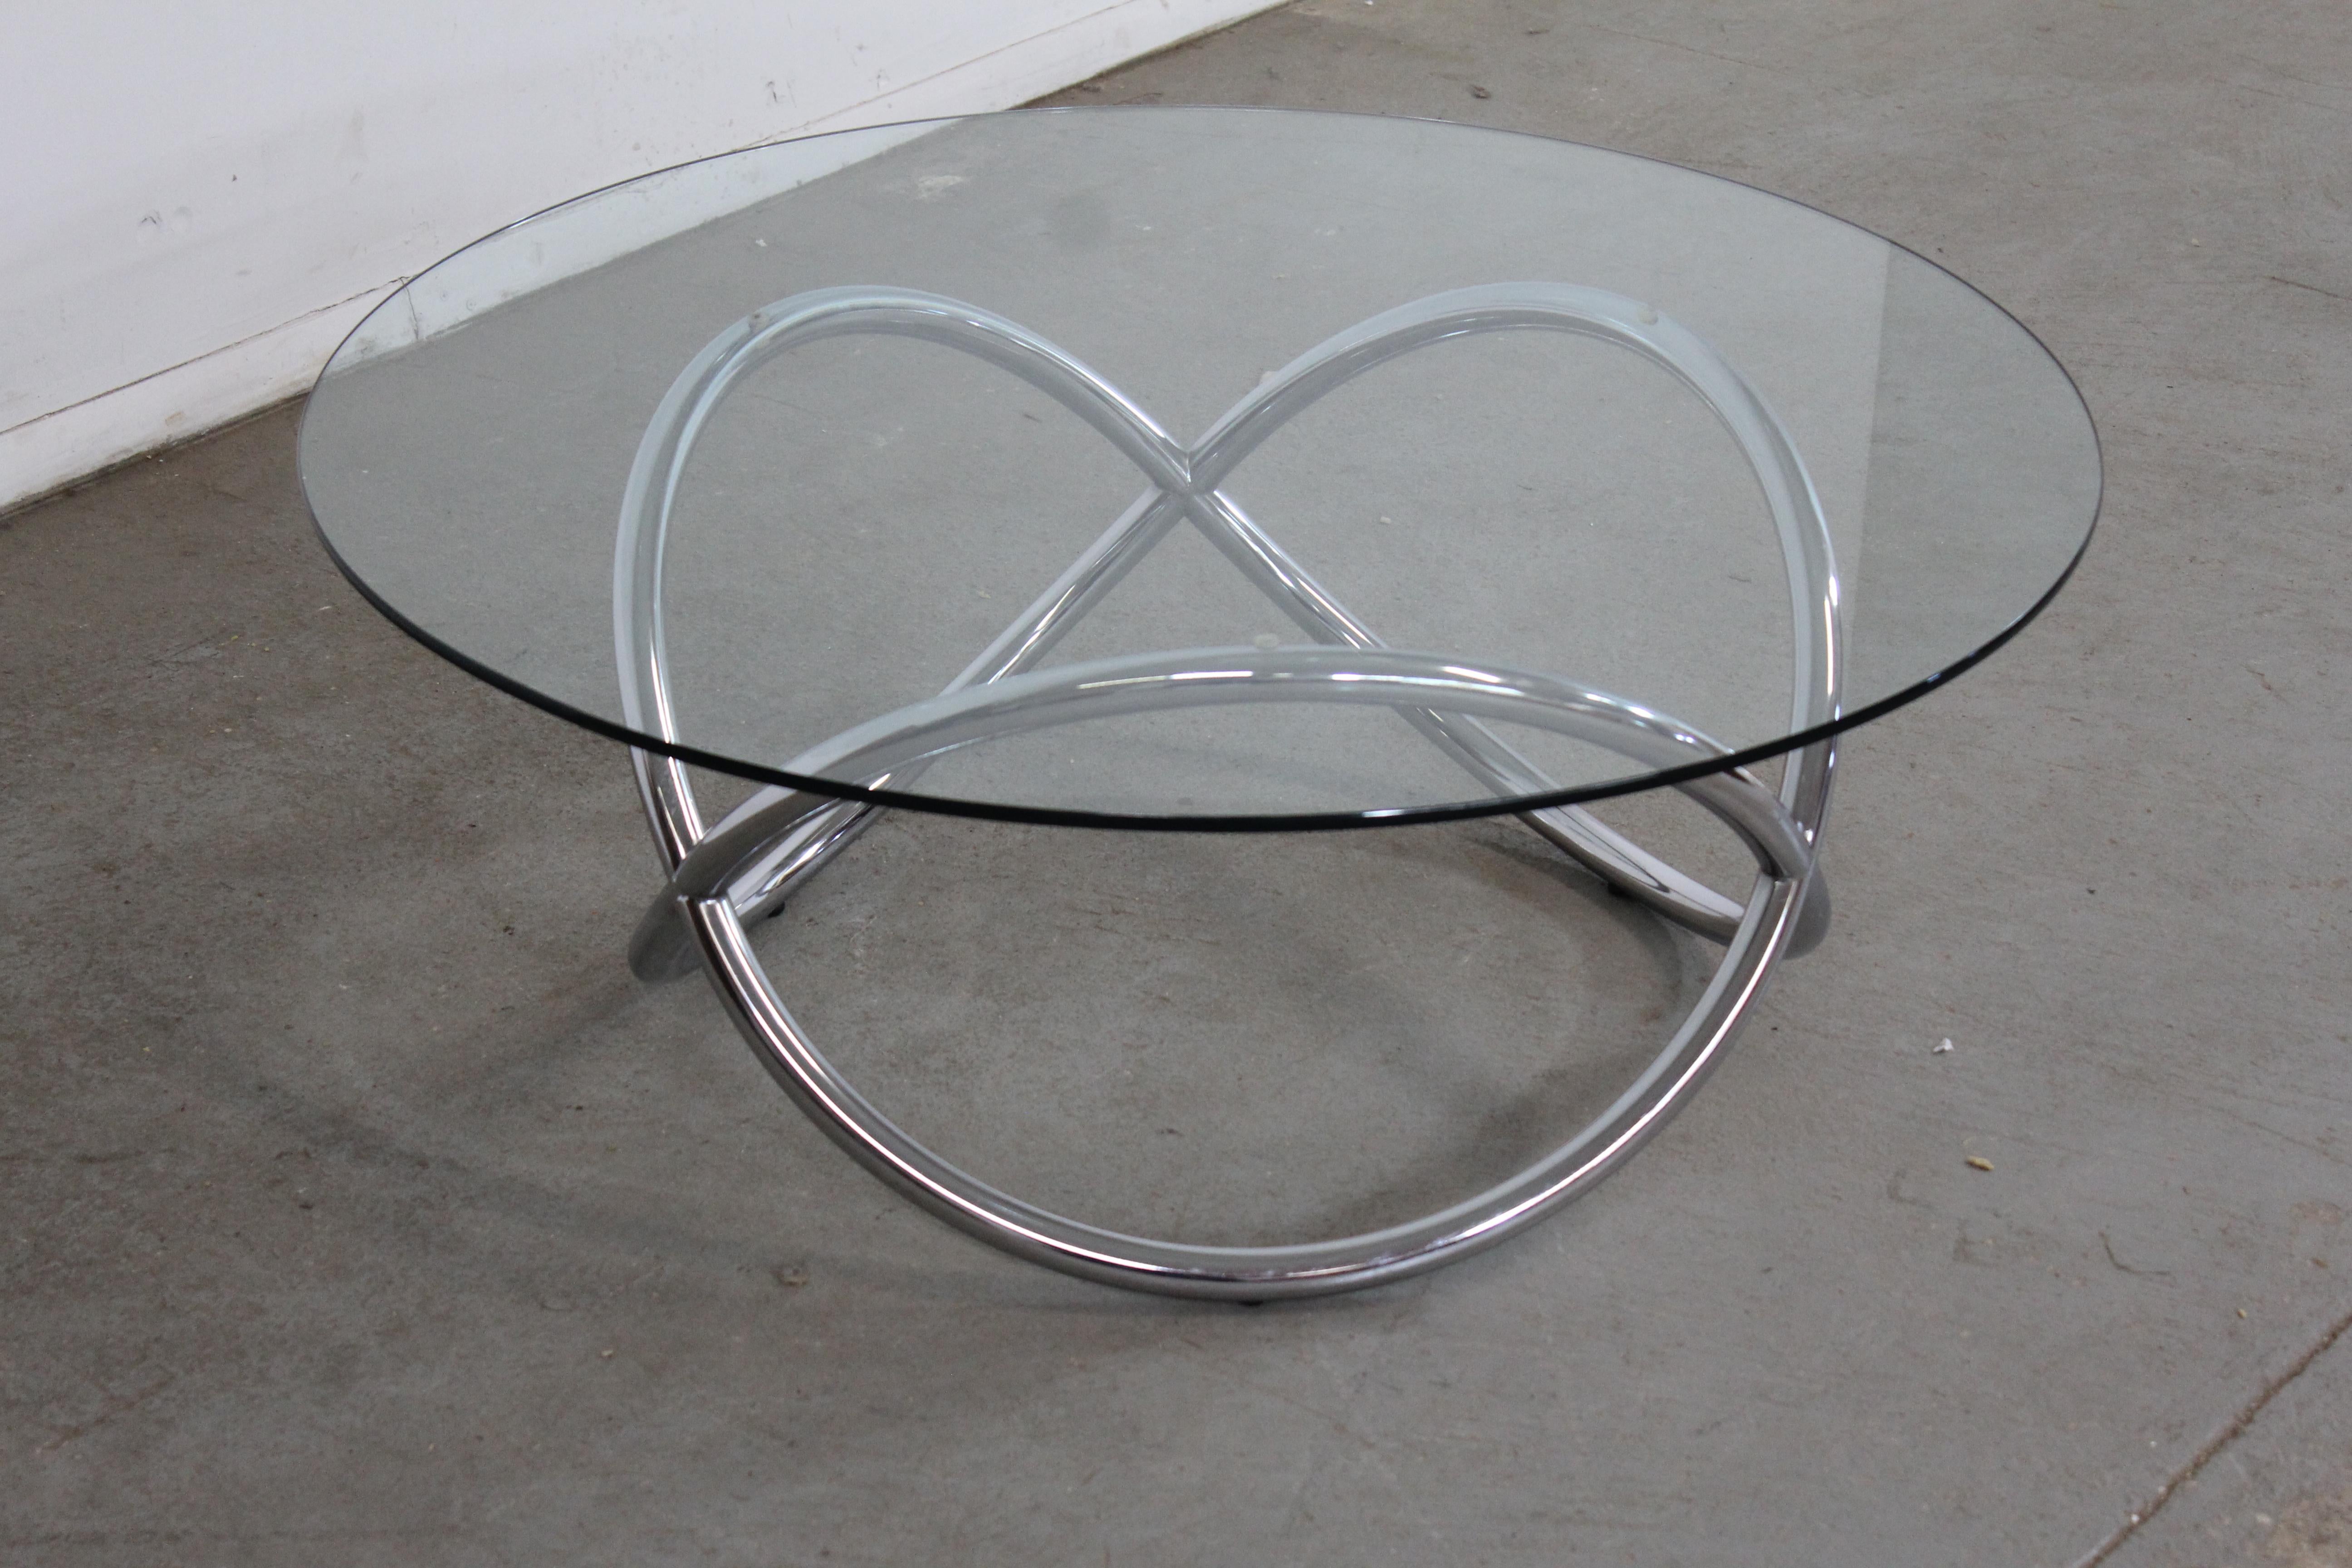 Vintage Mid Century Modern twisted chrome pretzel glass coffee table
Offered is a Vintage Mid Century Modern twisted chrome pretzel glass coffee table. The pretzel lines of the flowing base and design are what make this table stand out. Featuring a